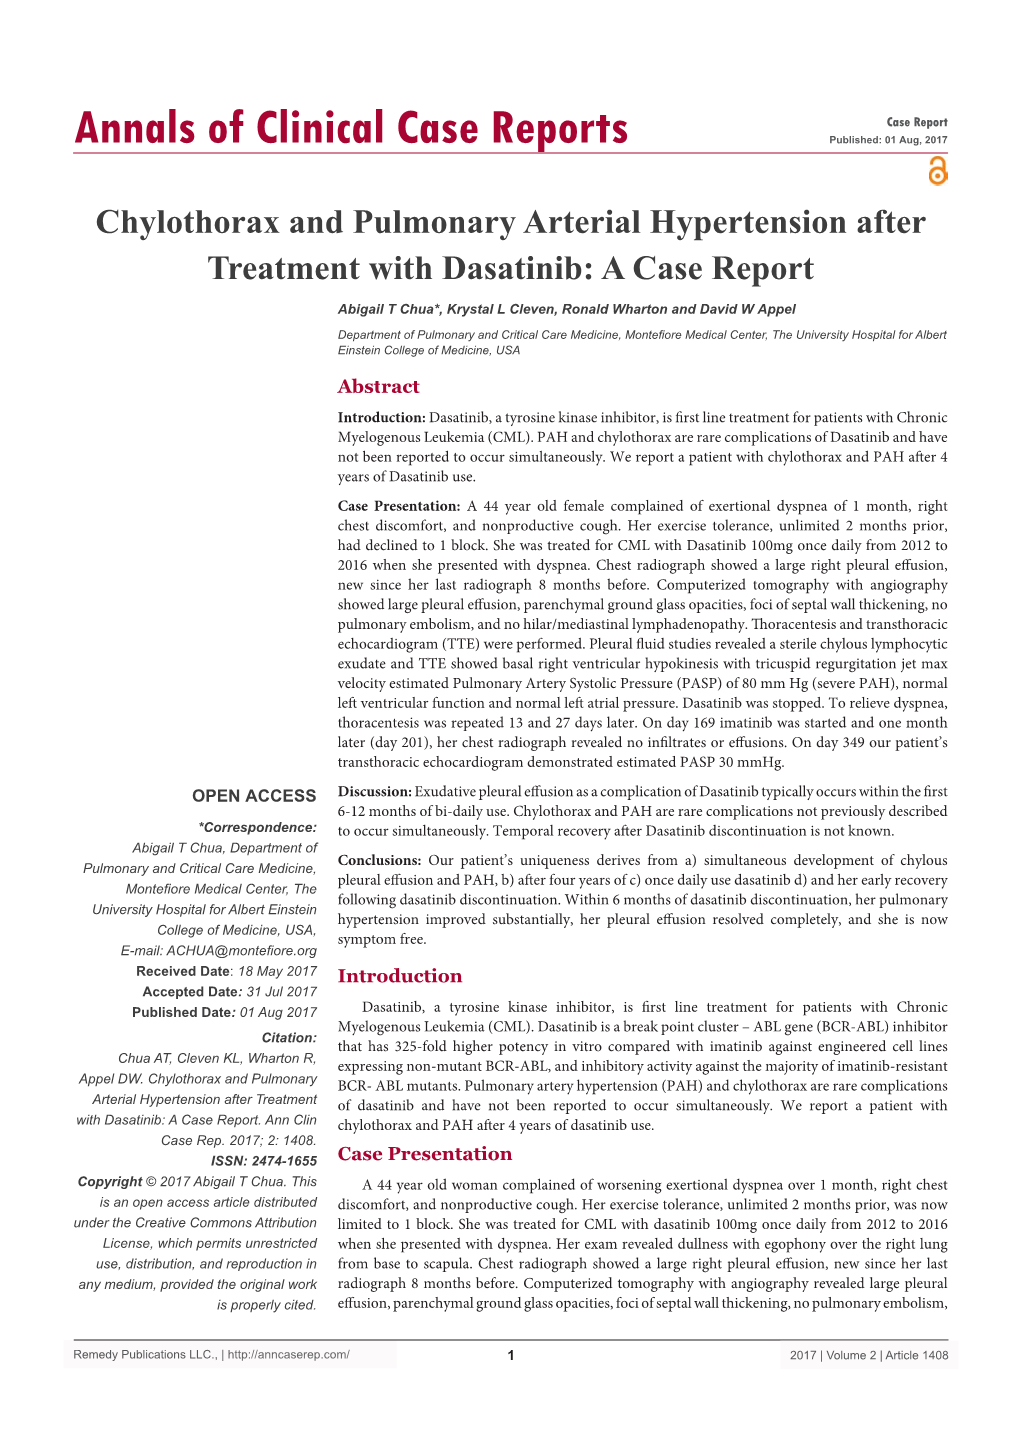 Chylothorax and Pulmonary Arterial Hypertension After Treatment with Dasatinib: a Case Report